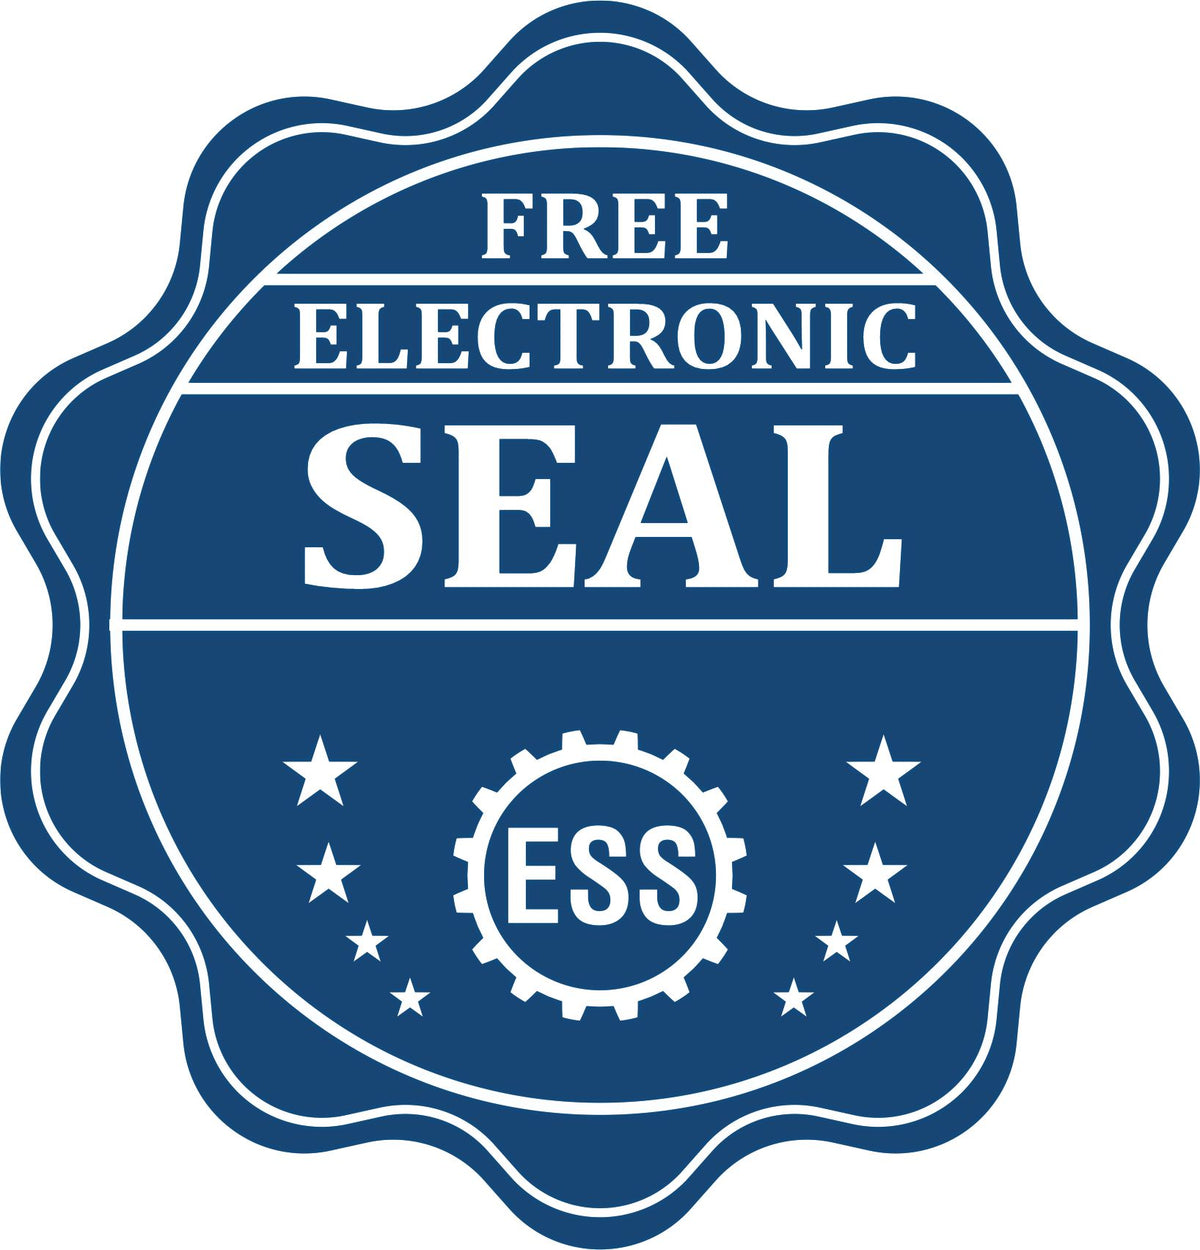 A badge showing a free electronic seal for the Gift Massachusetts Land Surveyor Seal with stars and the ESS gear on the emblem.